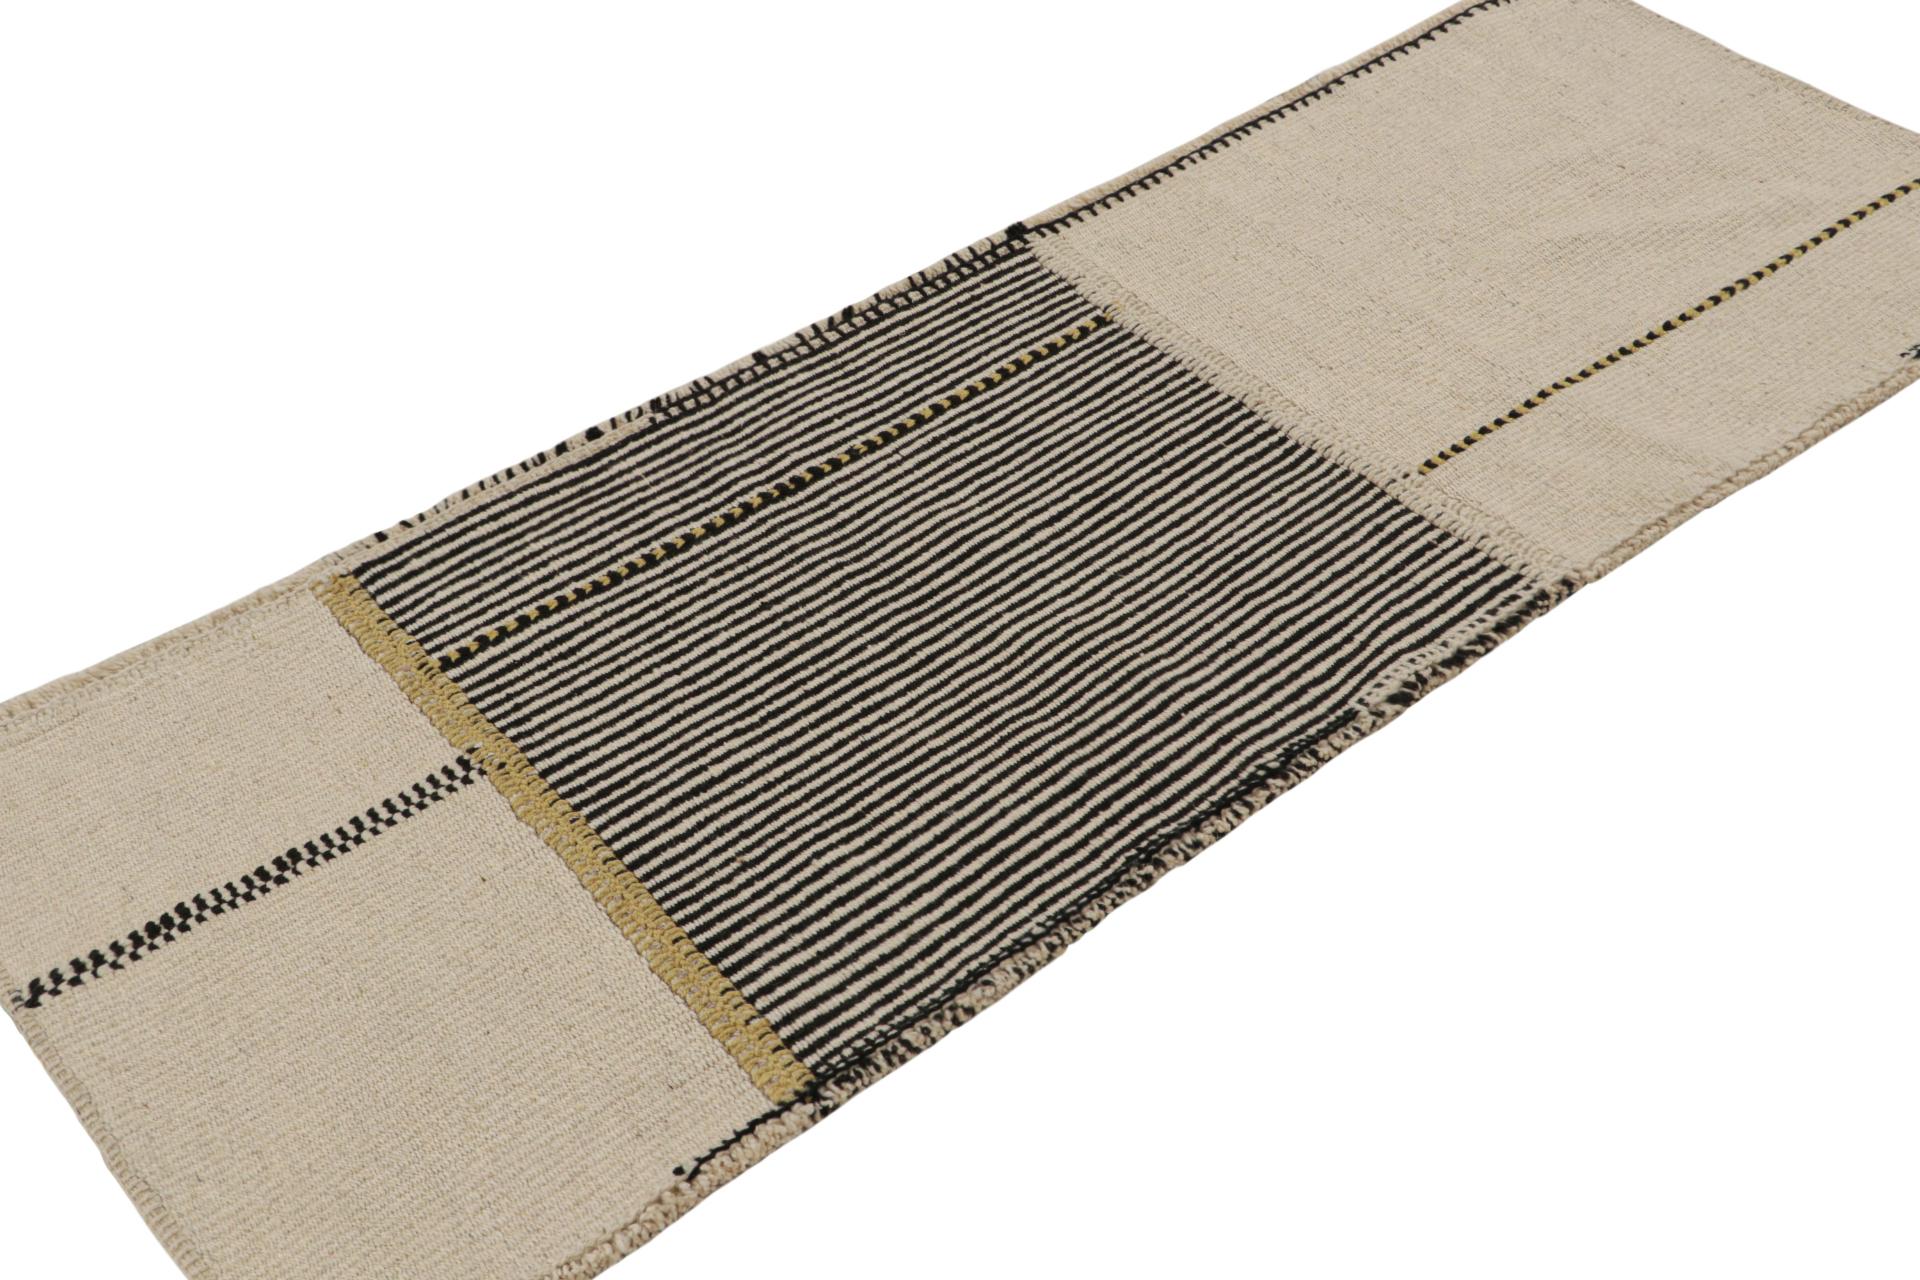 Handwoven in wool, a 2x6 runner Kilim in black and beige/brown tones, from a bold new line of contemporary flatweaves, ‘Rez Kilim’, by Rug & Kilim.

On the Design: 

Connoting a modern take on classic panel-weaving, our latest “Rez Kilim” enjoys